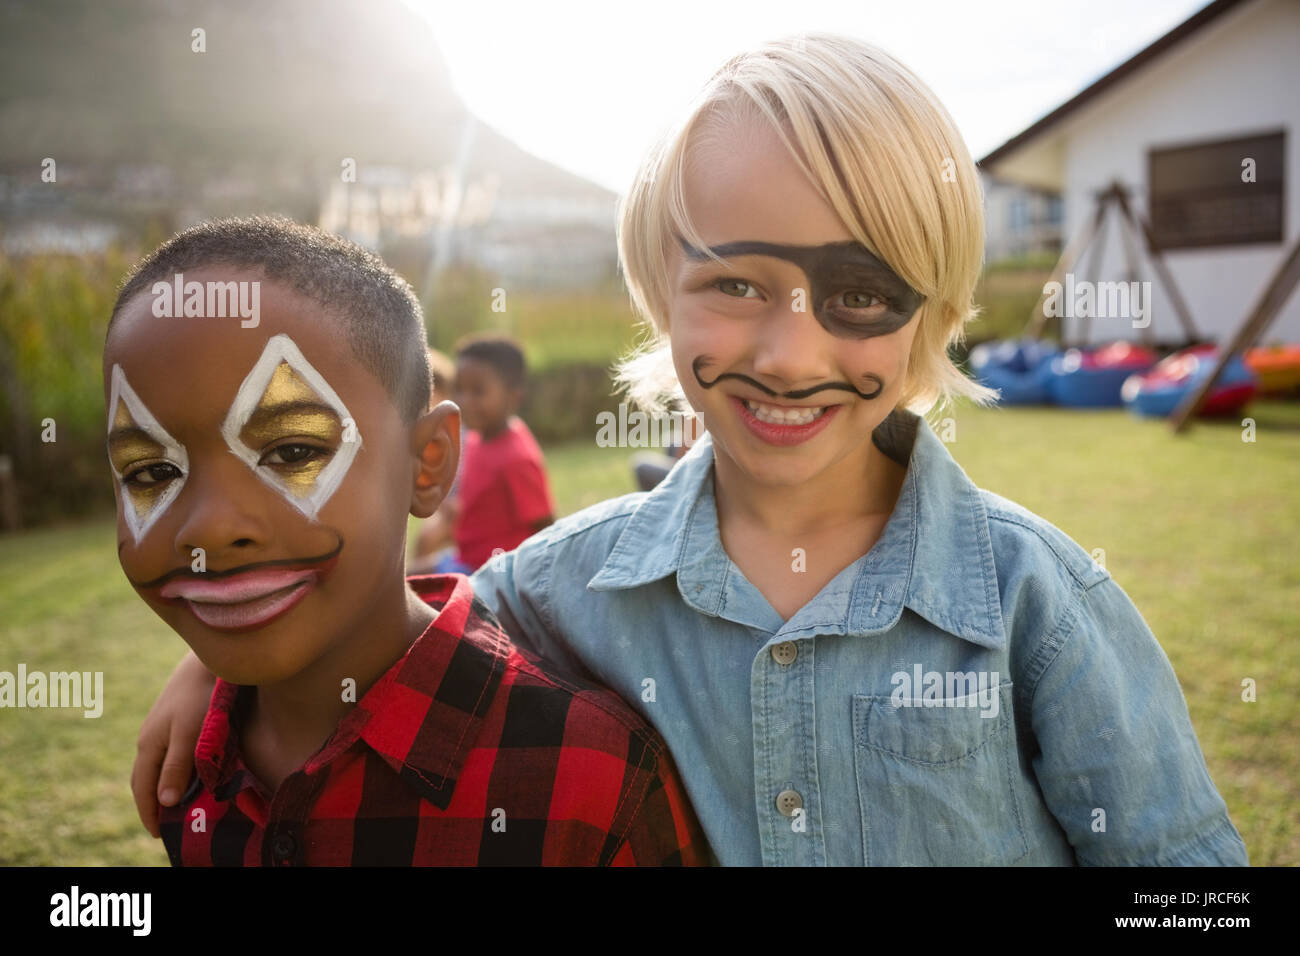 Portrait of boys with face paint standing in yard during birthday party Stock Photo